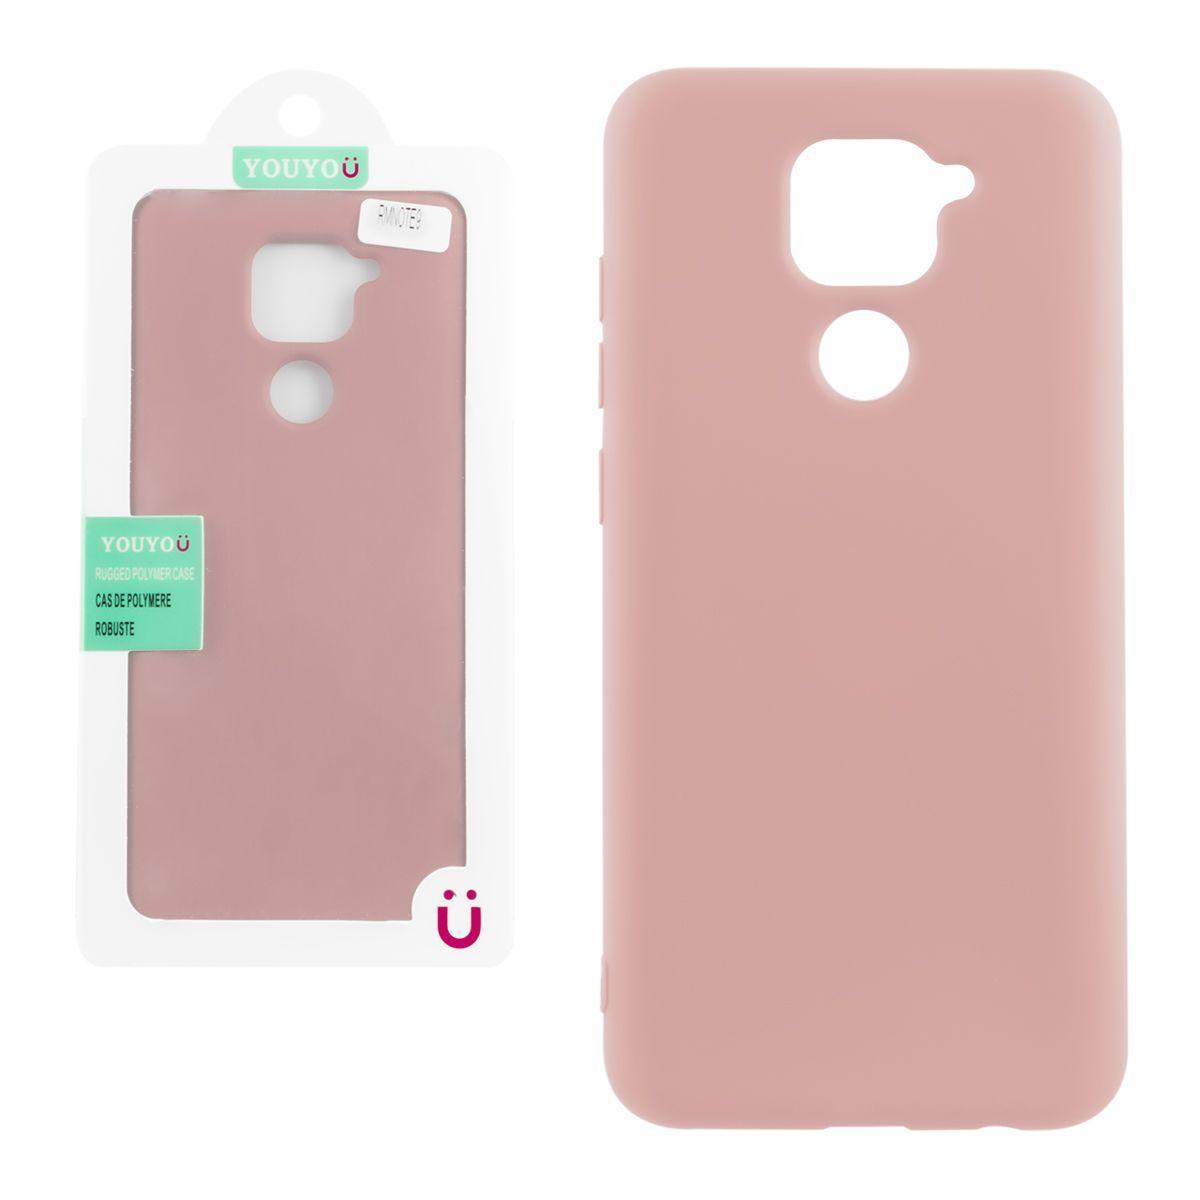 Чехол для Xiaomi Redmi Note 9 back cover YouYou Silky and soft-touch Silicone Cover, Pink - фото 1 - id-p115053880